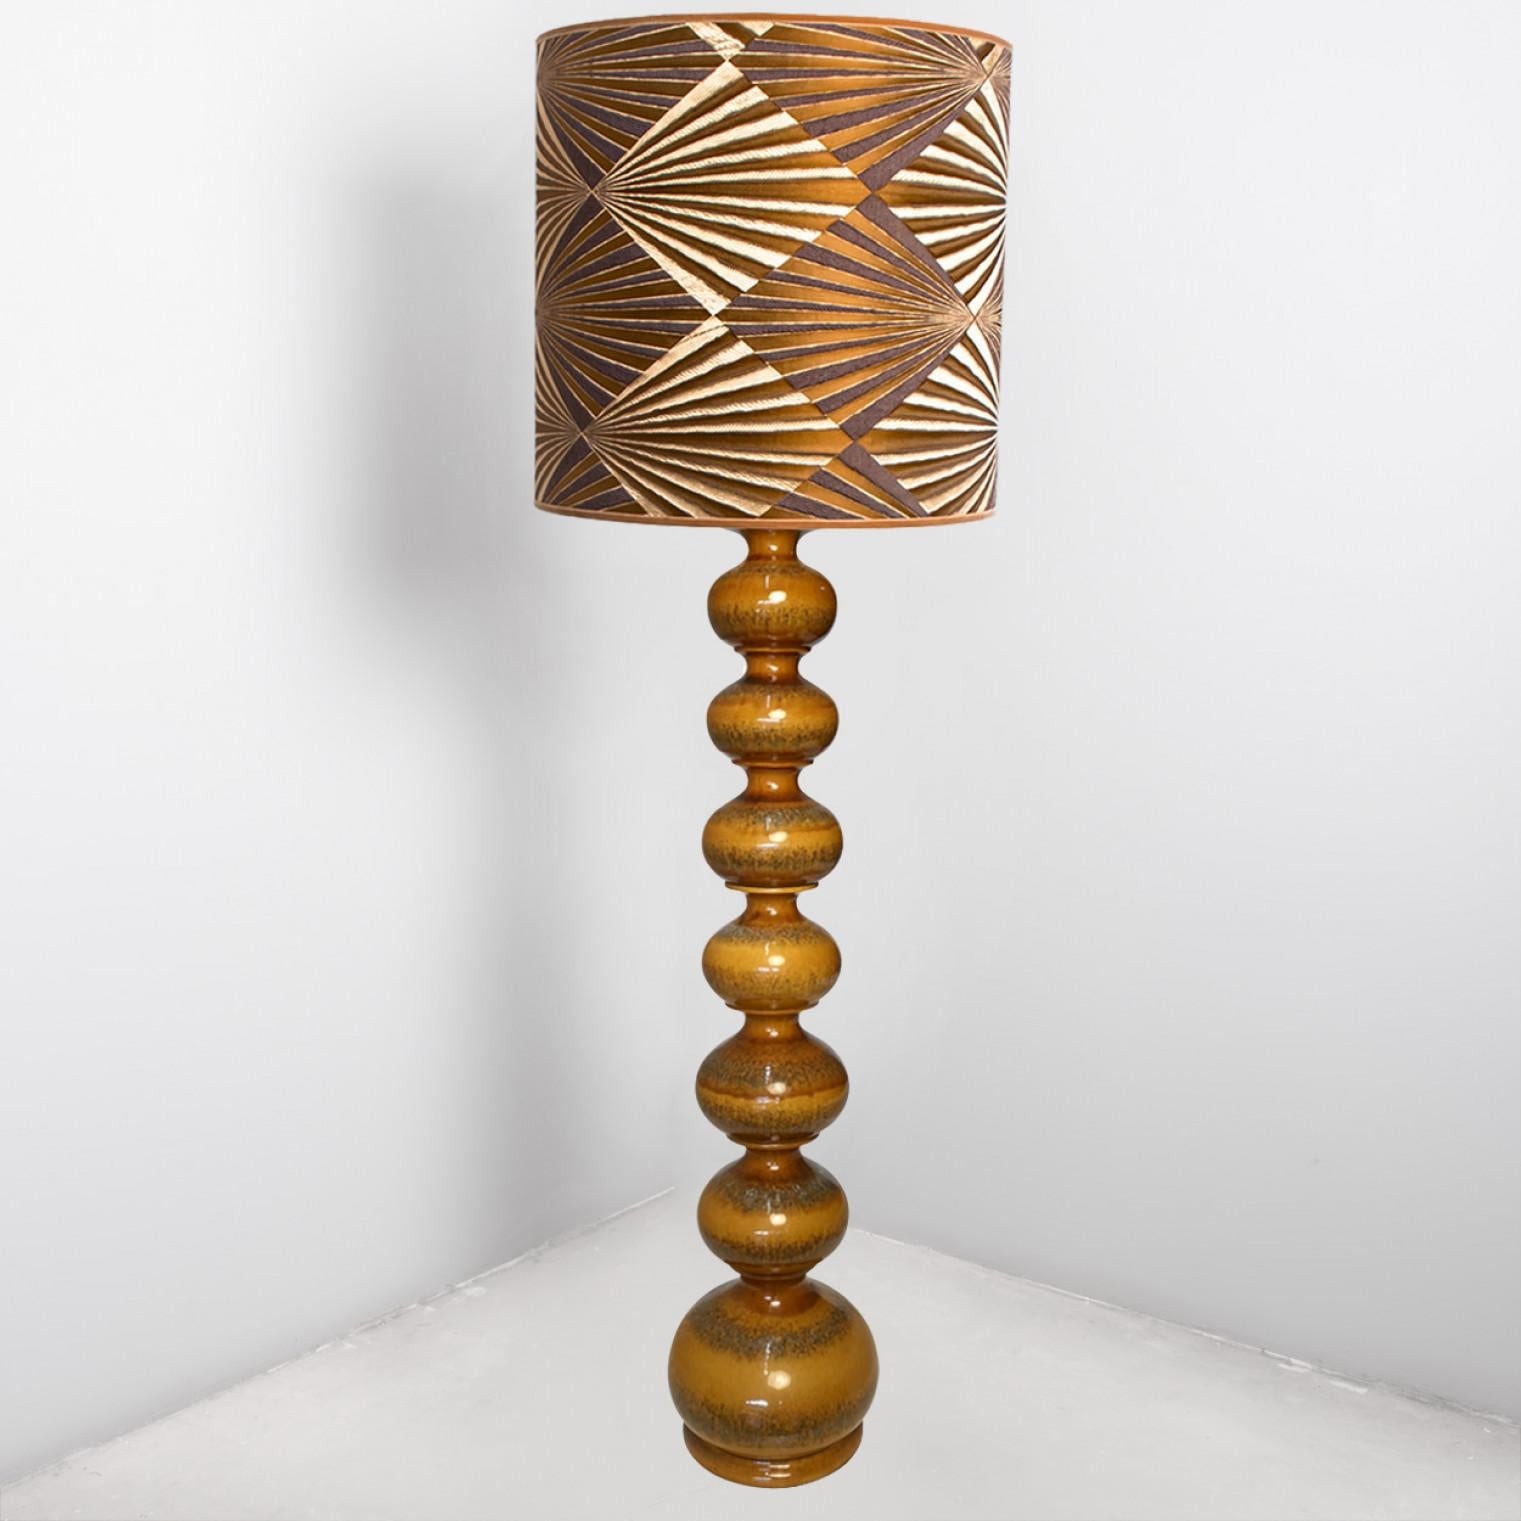 Exceptional ceramic bubble floor lamp by Kaiser, Europe, Germany, 1960s. Beautiful sculptural piece handmade ceramic in rich glazed brown tones. With special new custom made  silk lamp shade whit fabric from Dedar and warm bronze/gold inner shade.